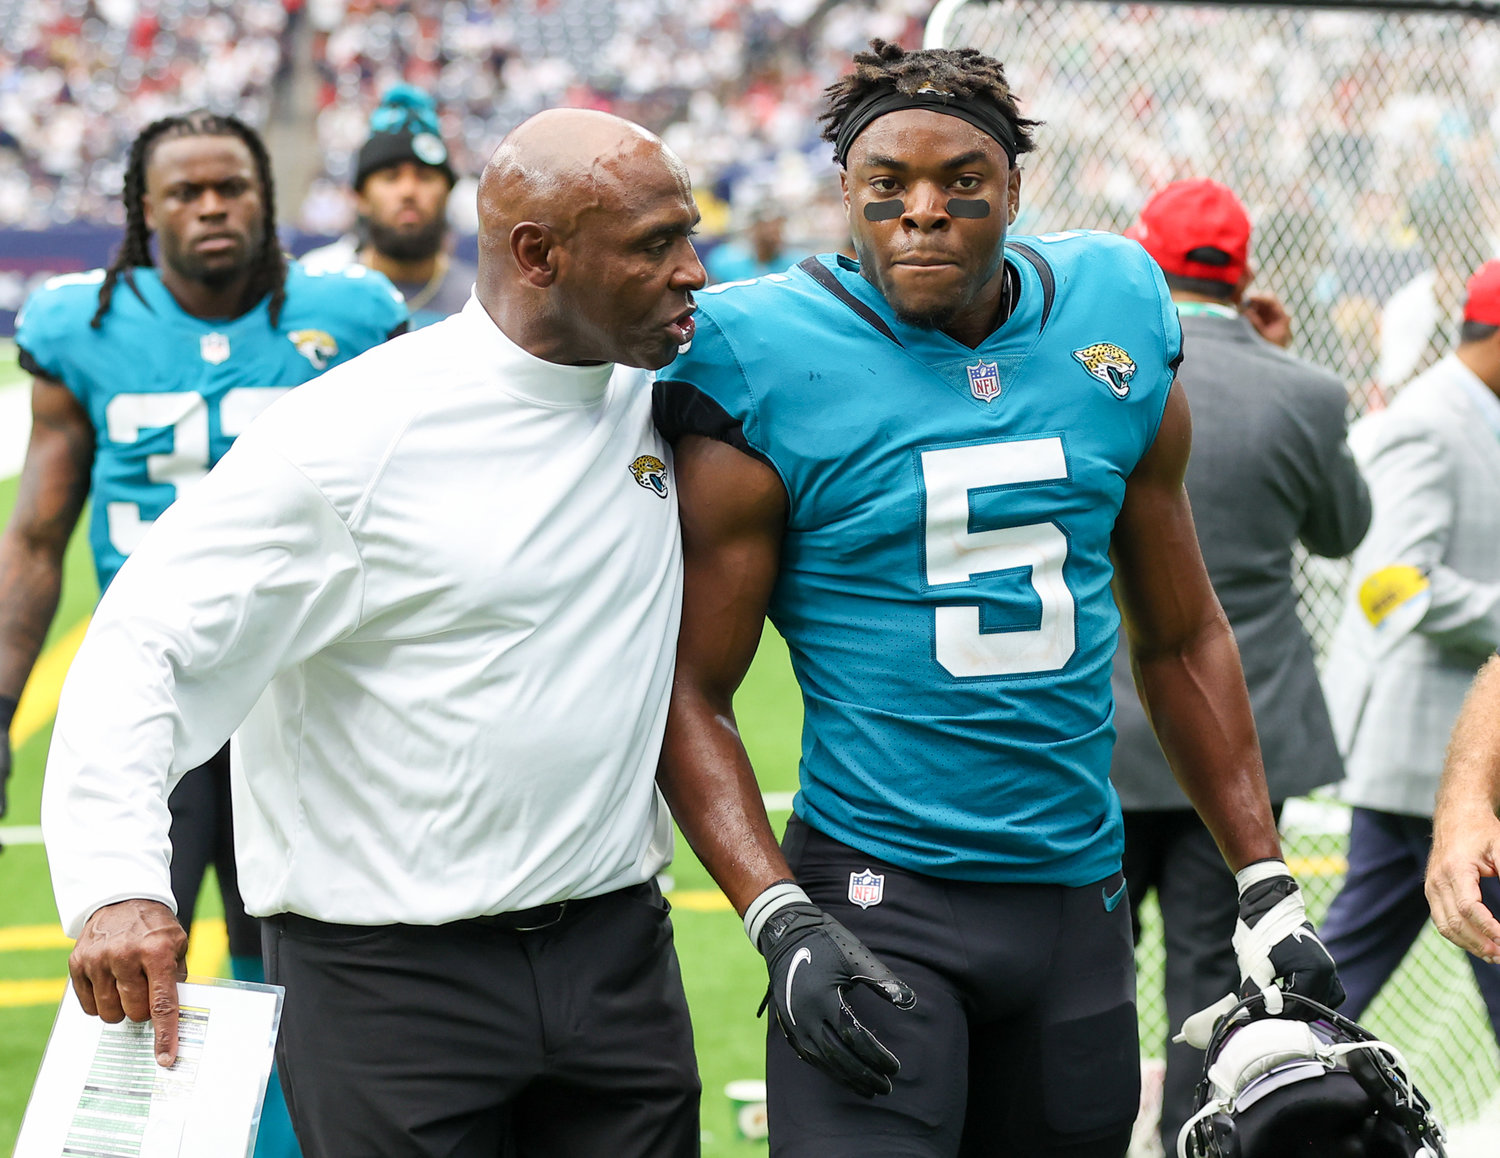 Jacksonville Jaguars associate head coach Charlie Strong talks with defensive back Rudy Ford (5) as the team heads to the locker room at halftime during an NFL game between the Houston Texans and the Jacksonville Jaguars on September 12, 2021 in Houston, Texas.